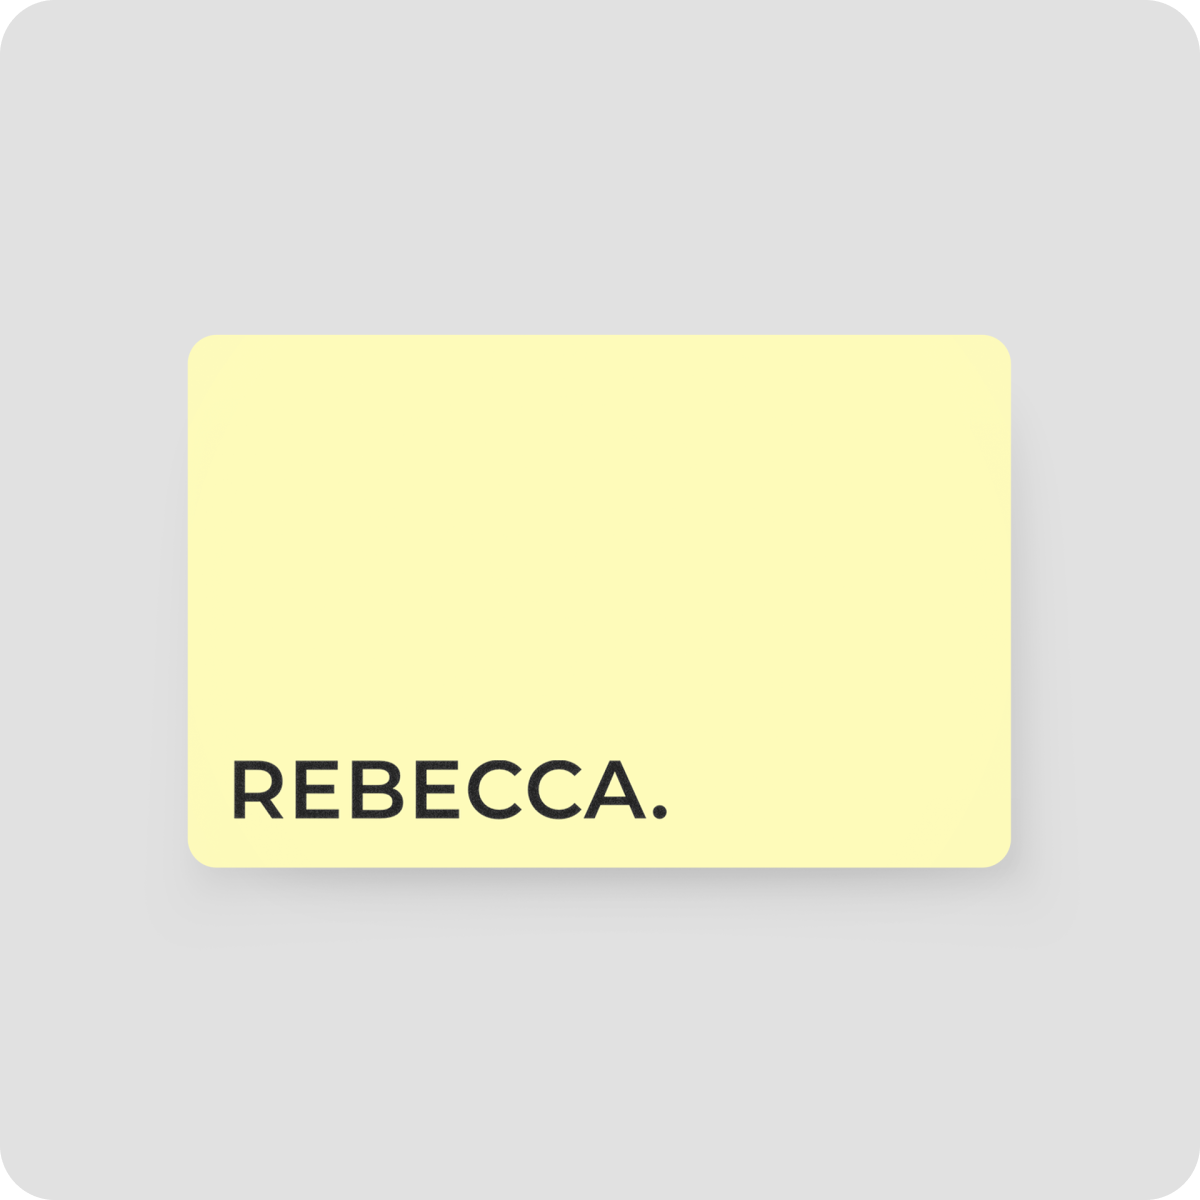 One Good Card: Smart Digital Name Card (Classic) - Personalised Near Field Communication (NFC) Digital Business Cards designs - Daisy Yellow